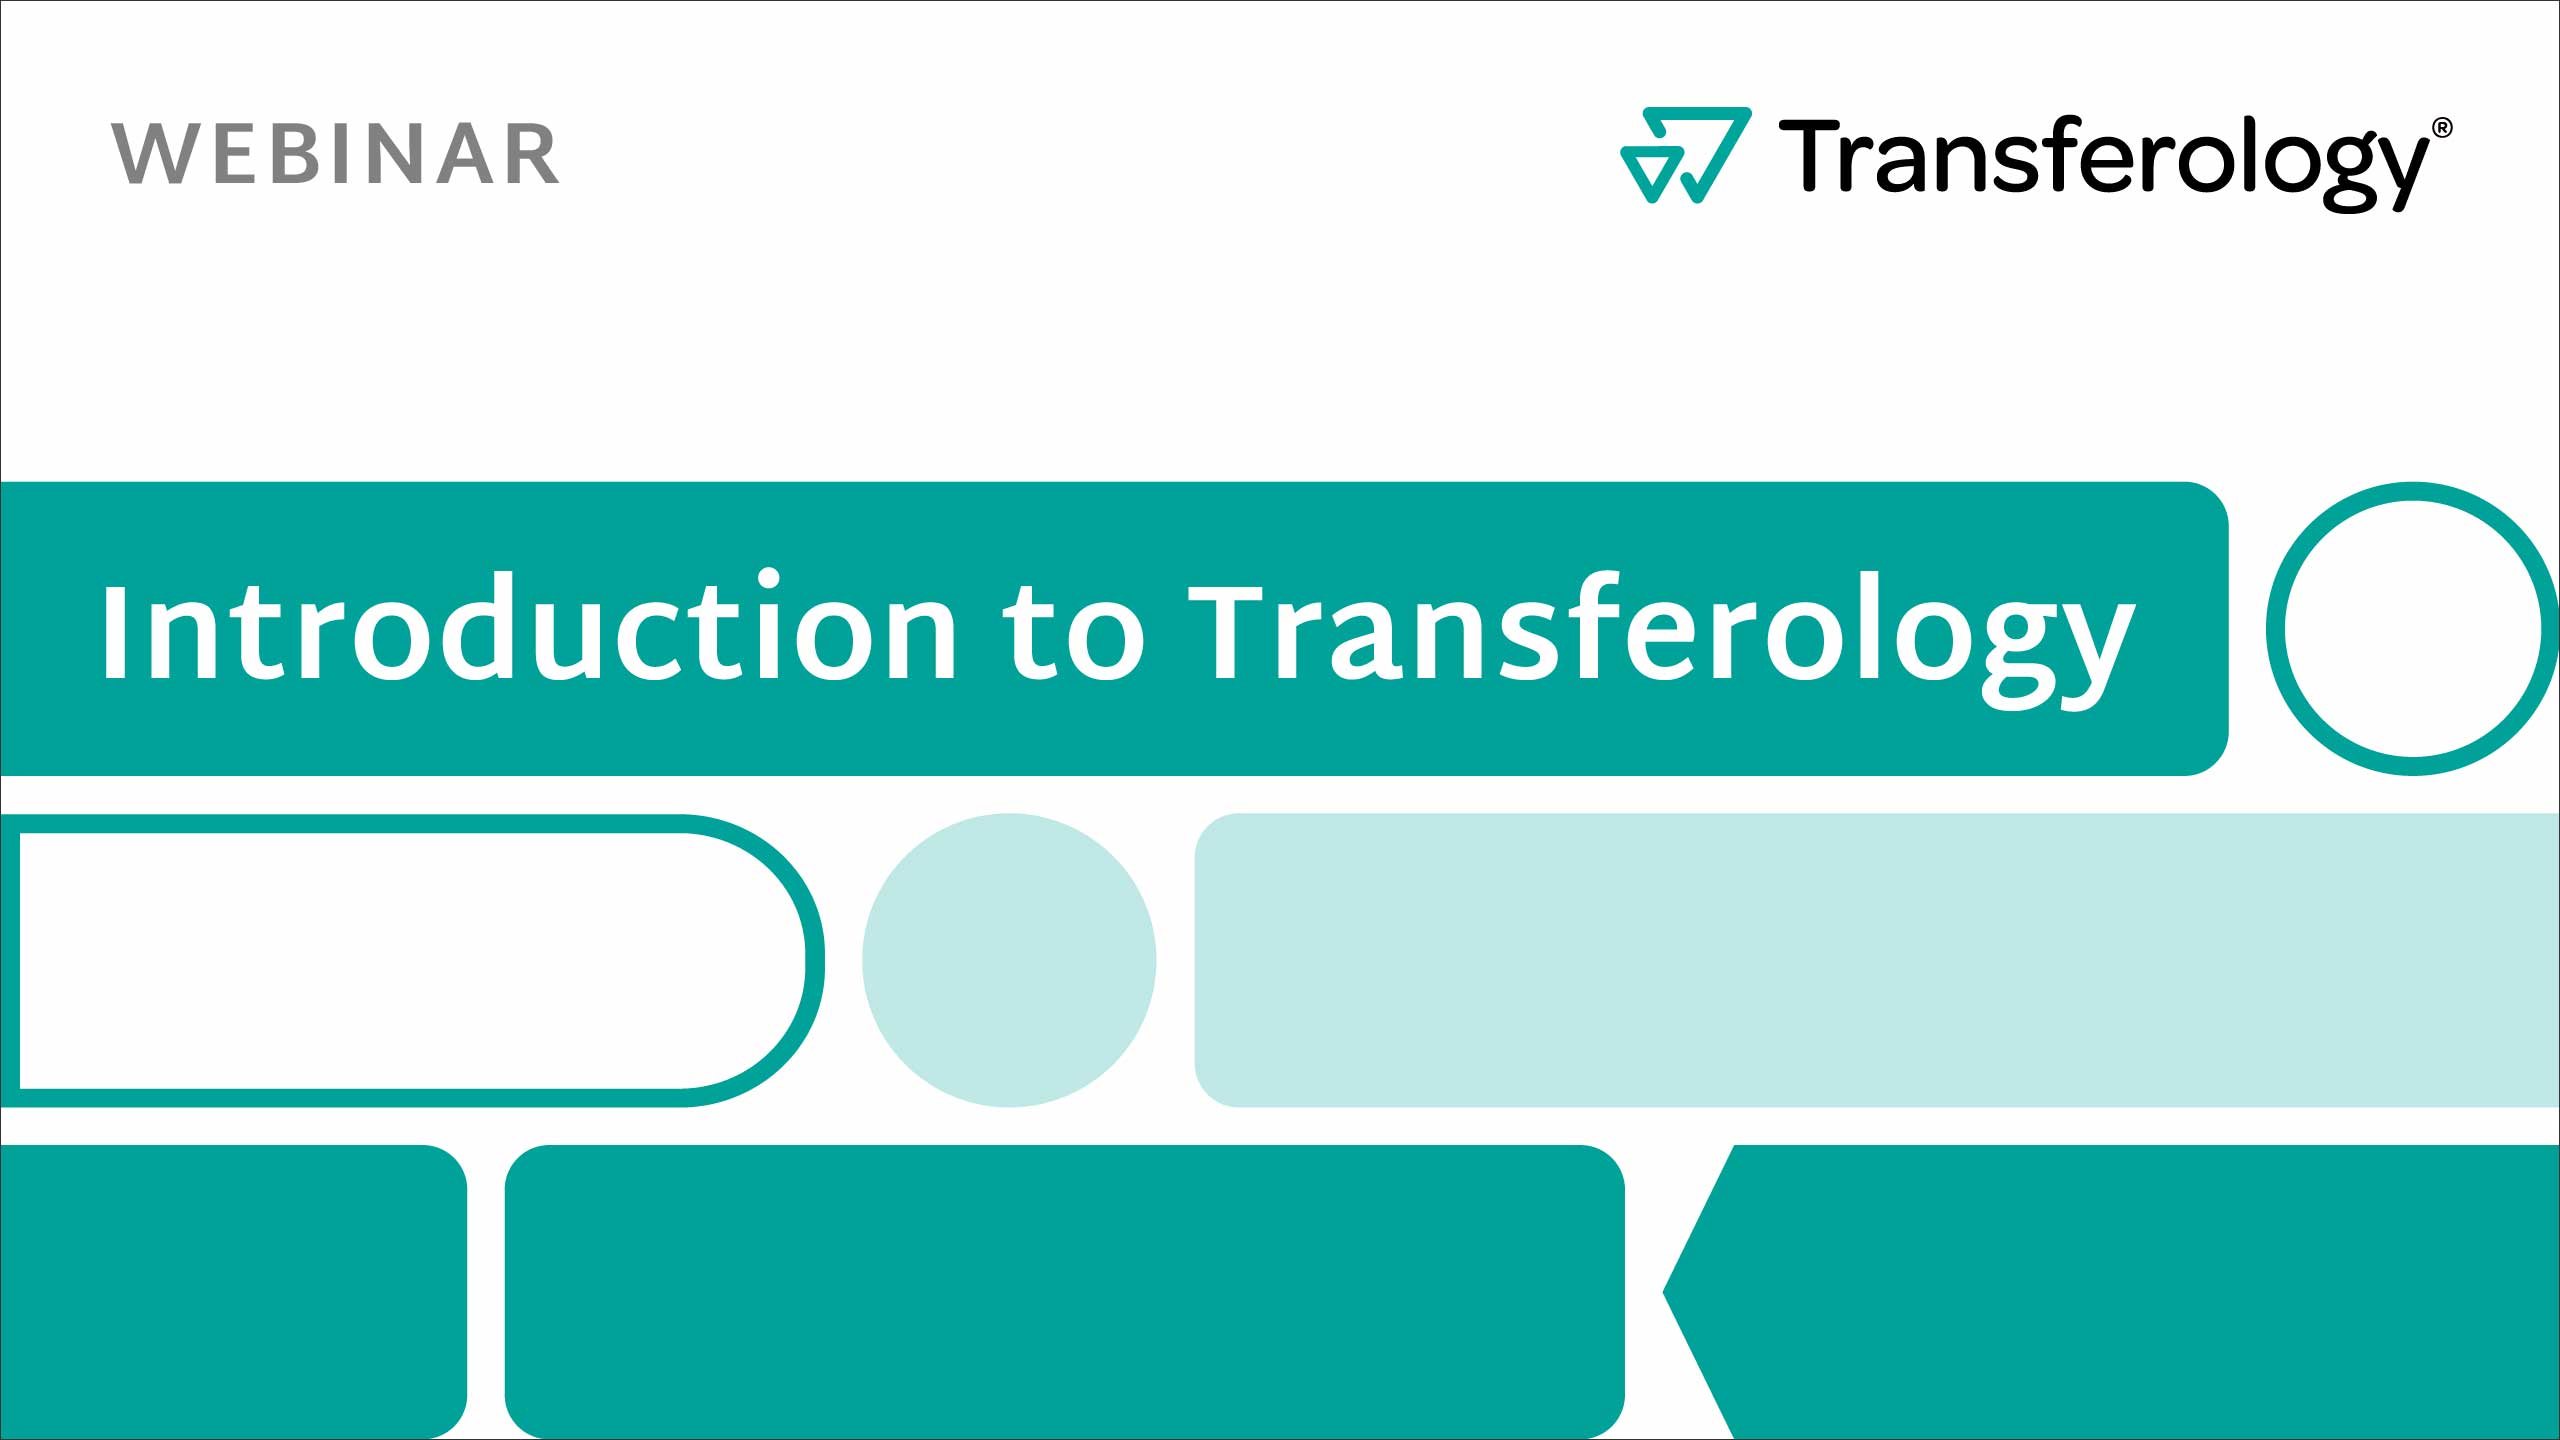 Transferology: Nationwide Transfer Network and Recruitment Tool